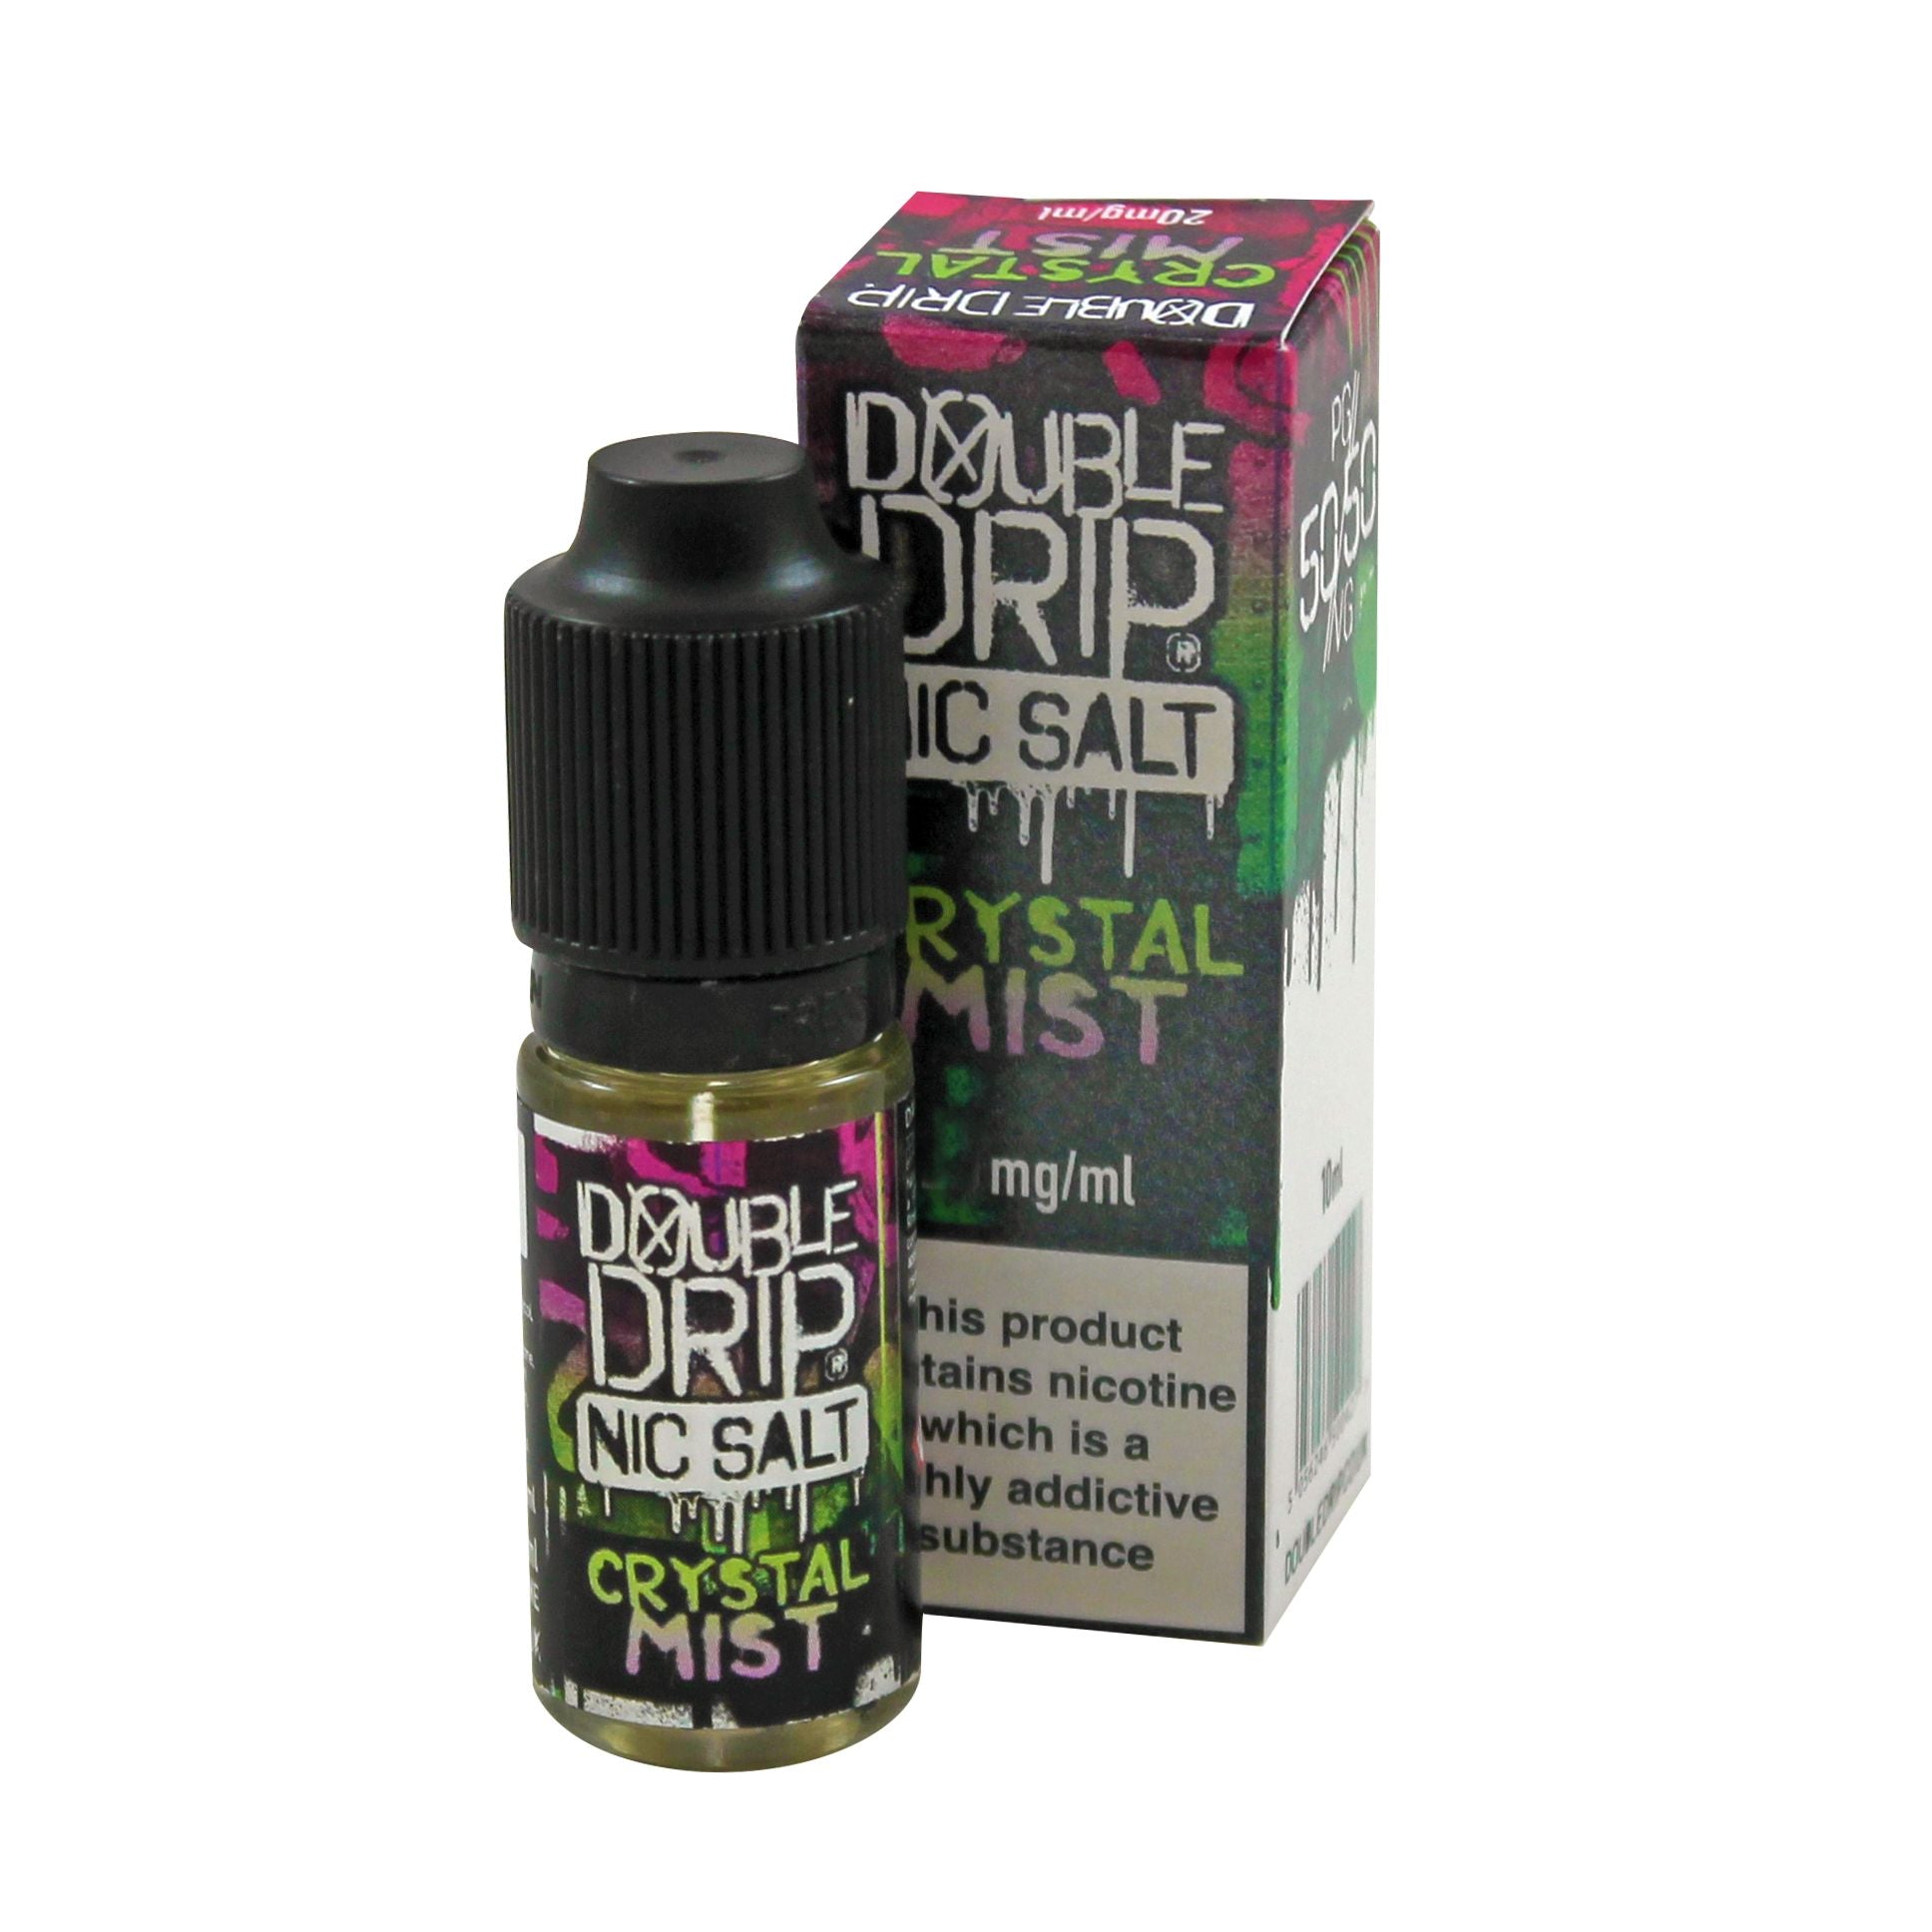 Double Drip Crystal Mist Nic Salt 10ml Out Of Date-10mg